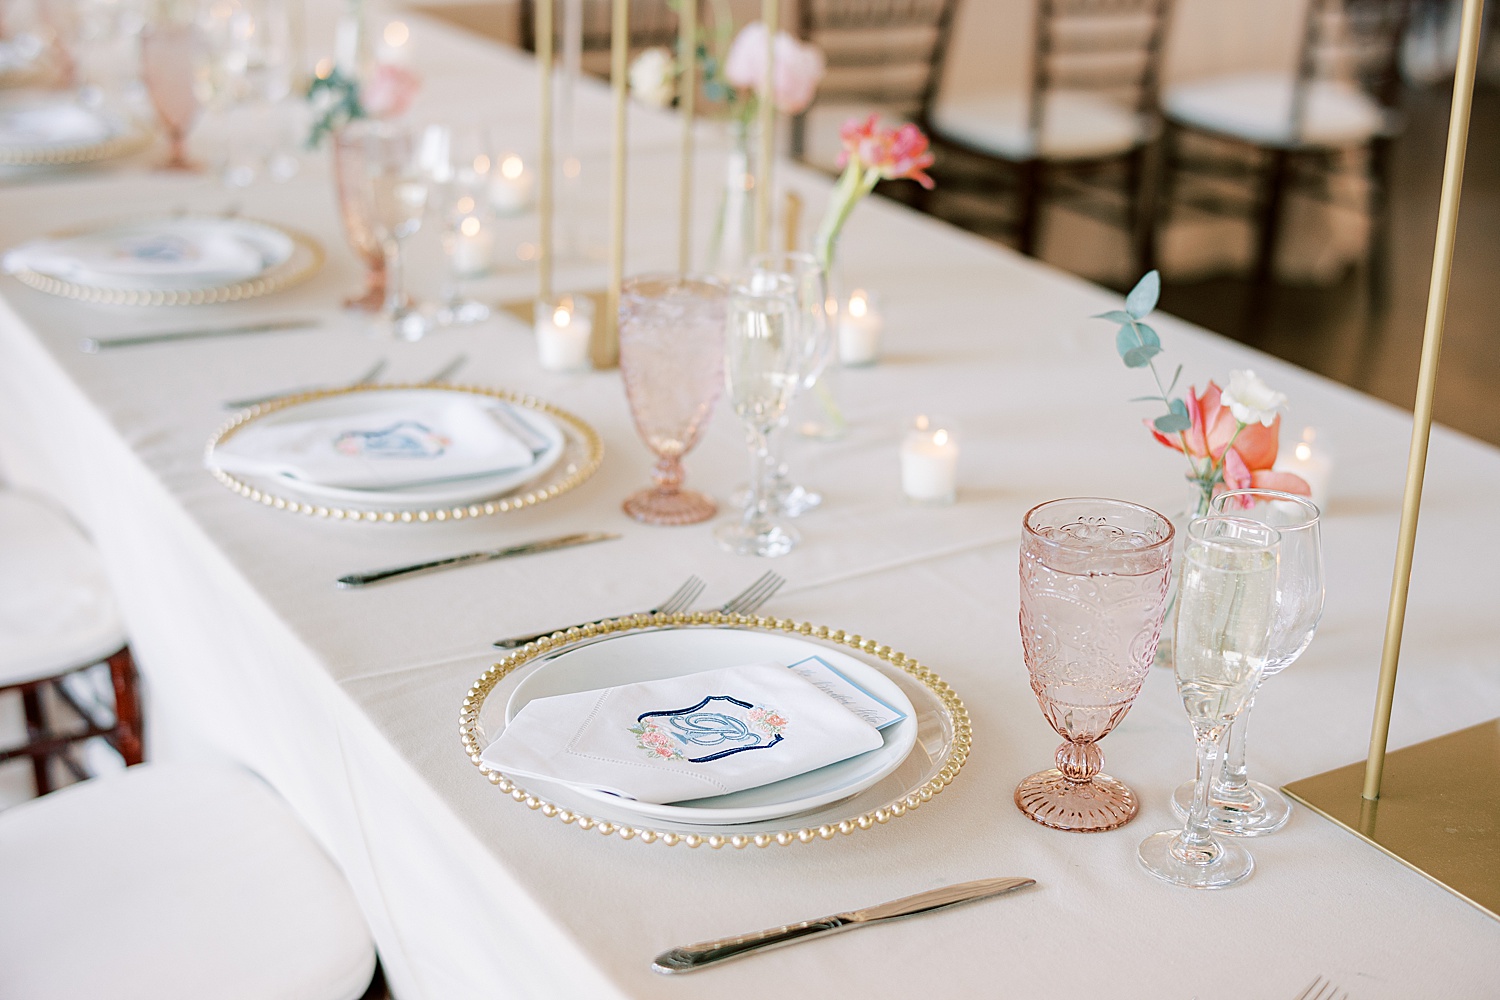 place setting with gold rimmed plates, pink depression glasses and custom crest napkins 